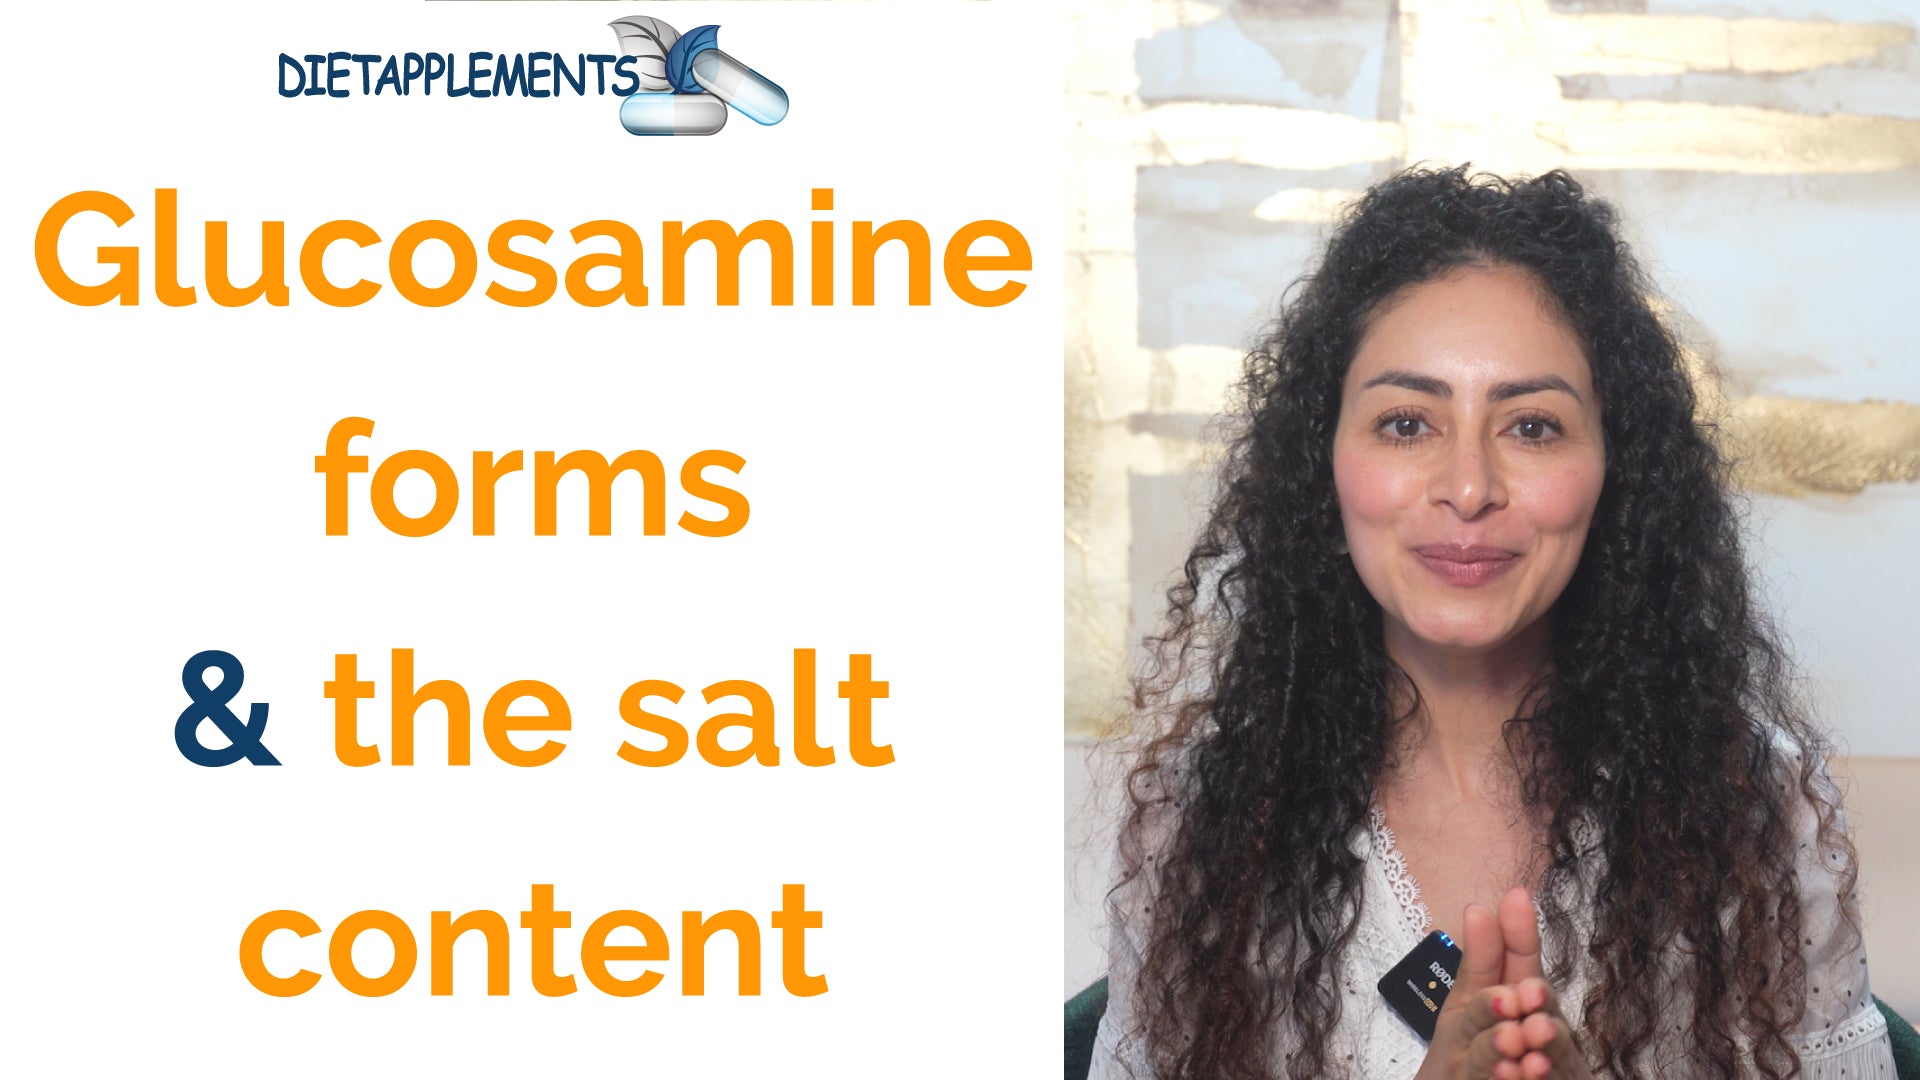 Glucosamine forms and the salt content